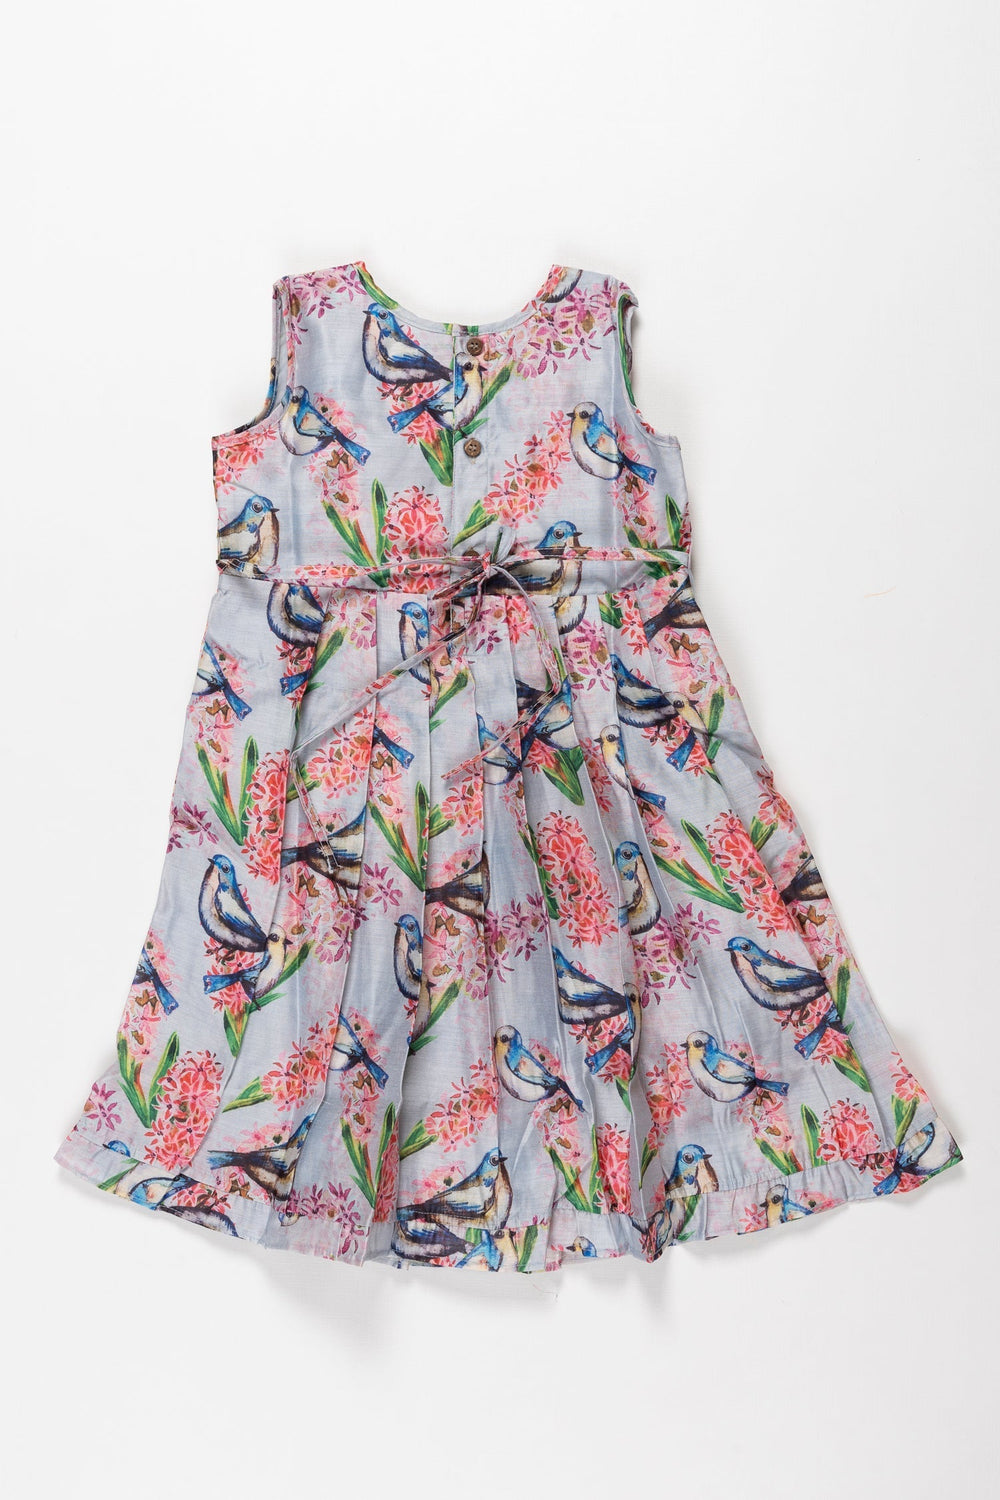 The Nesavu Girls Cotton Frock Charming Bird & Floral Printed Cotton Frock for Girls - Fresh Spring Collection Nesavu Girls Designer Cotton Print Frocks | Unique Casual Styles for Play | The Nesavu